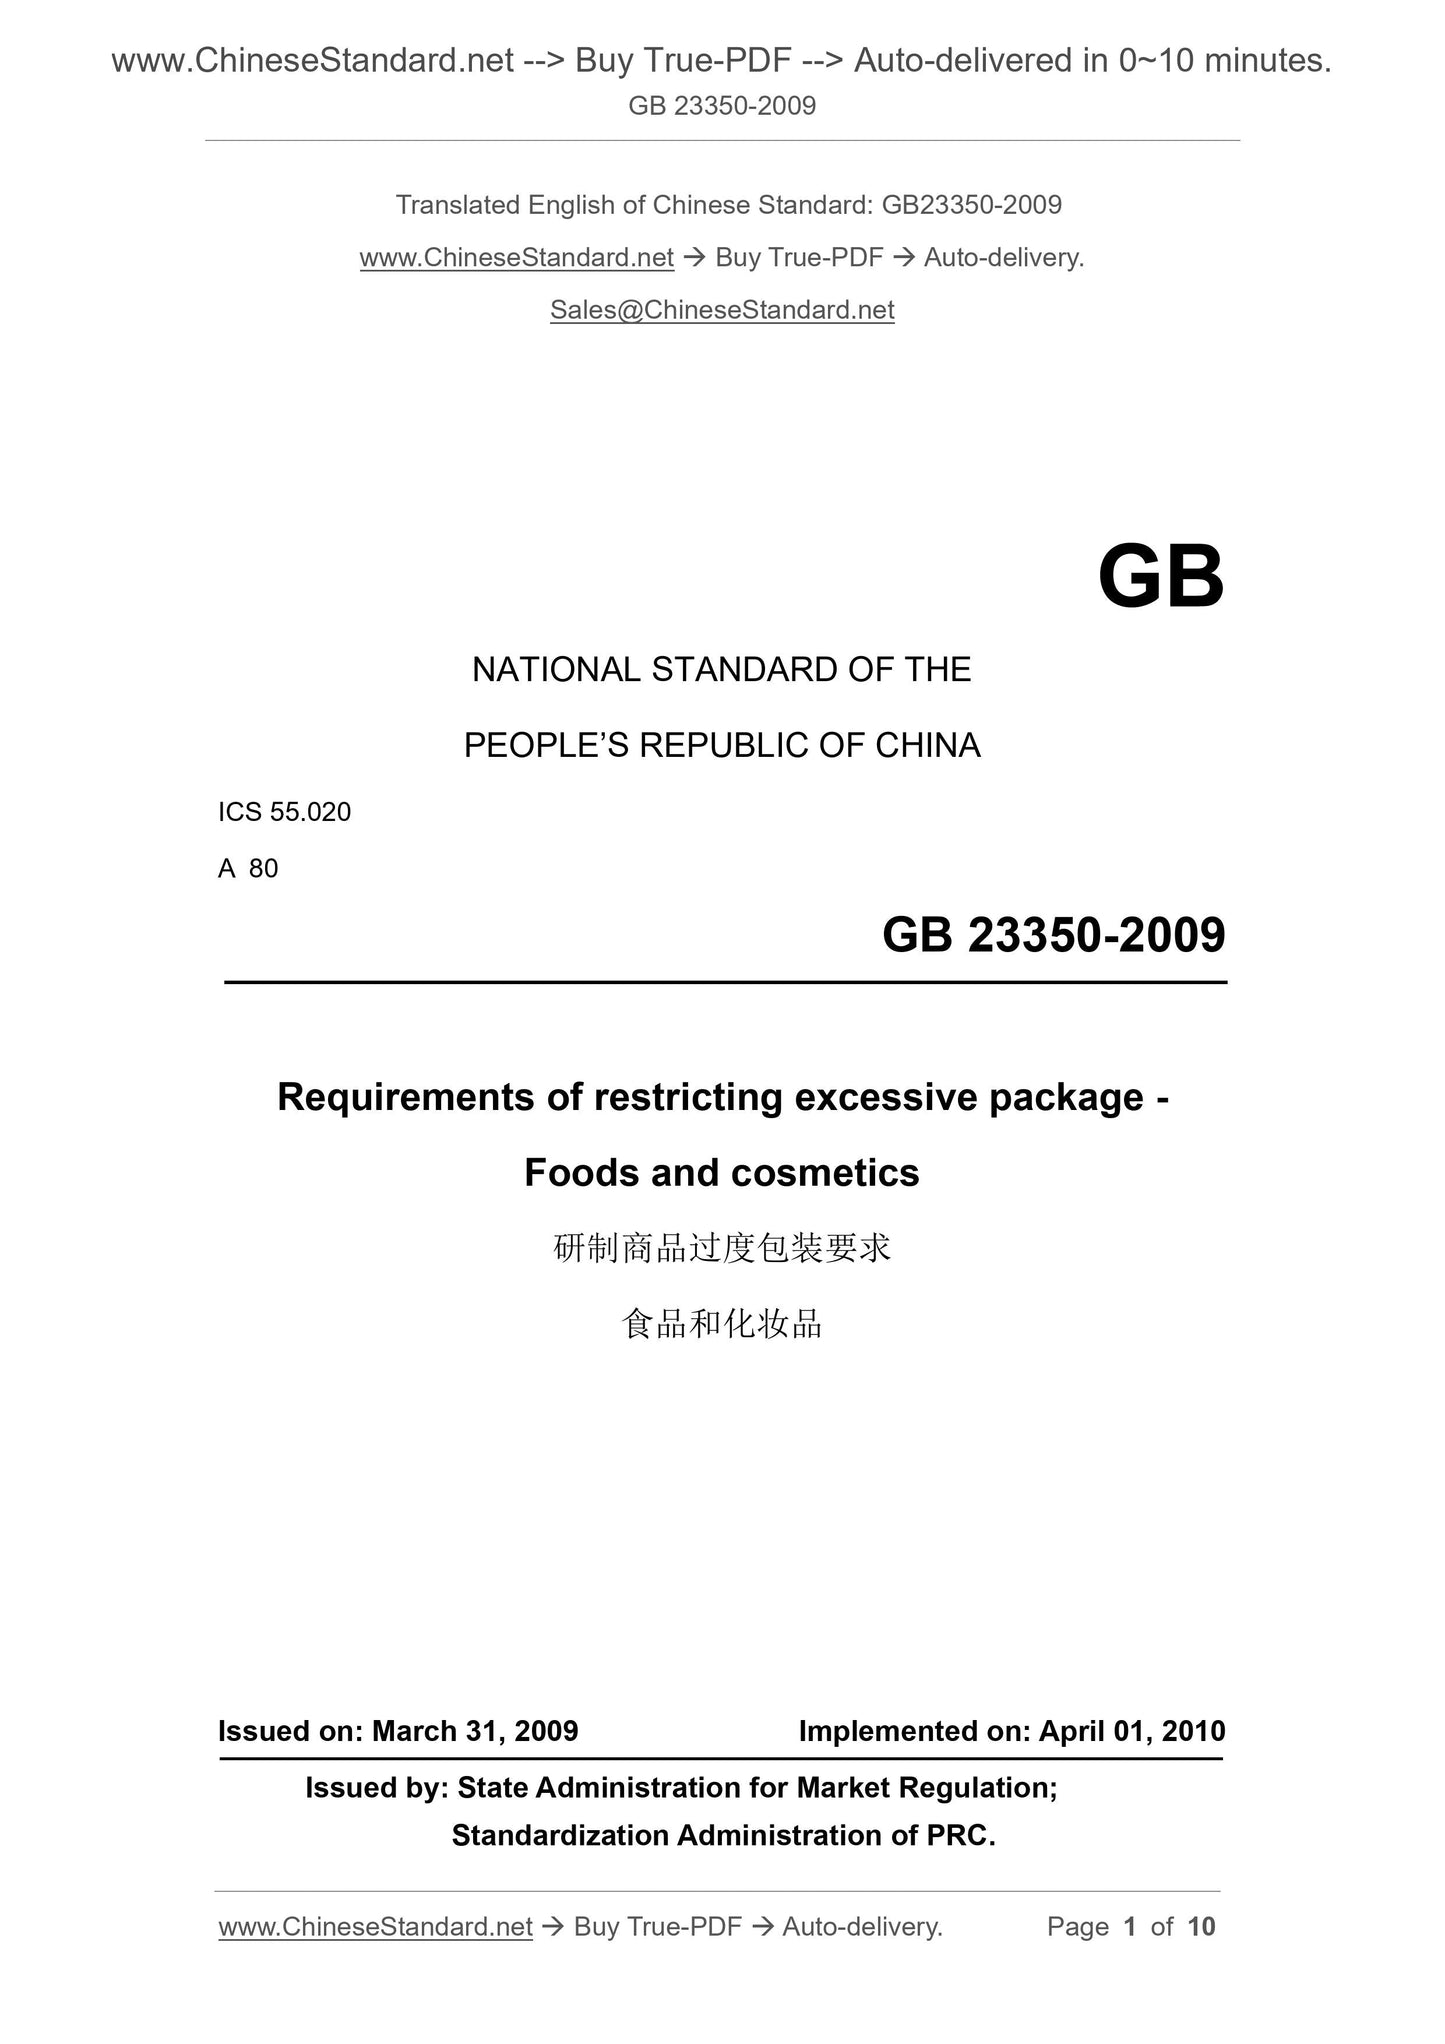 GB 23350-2009 Page 1